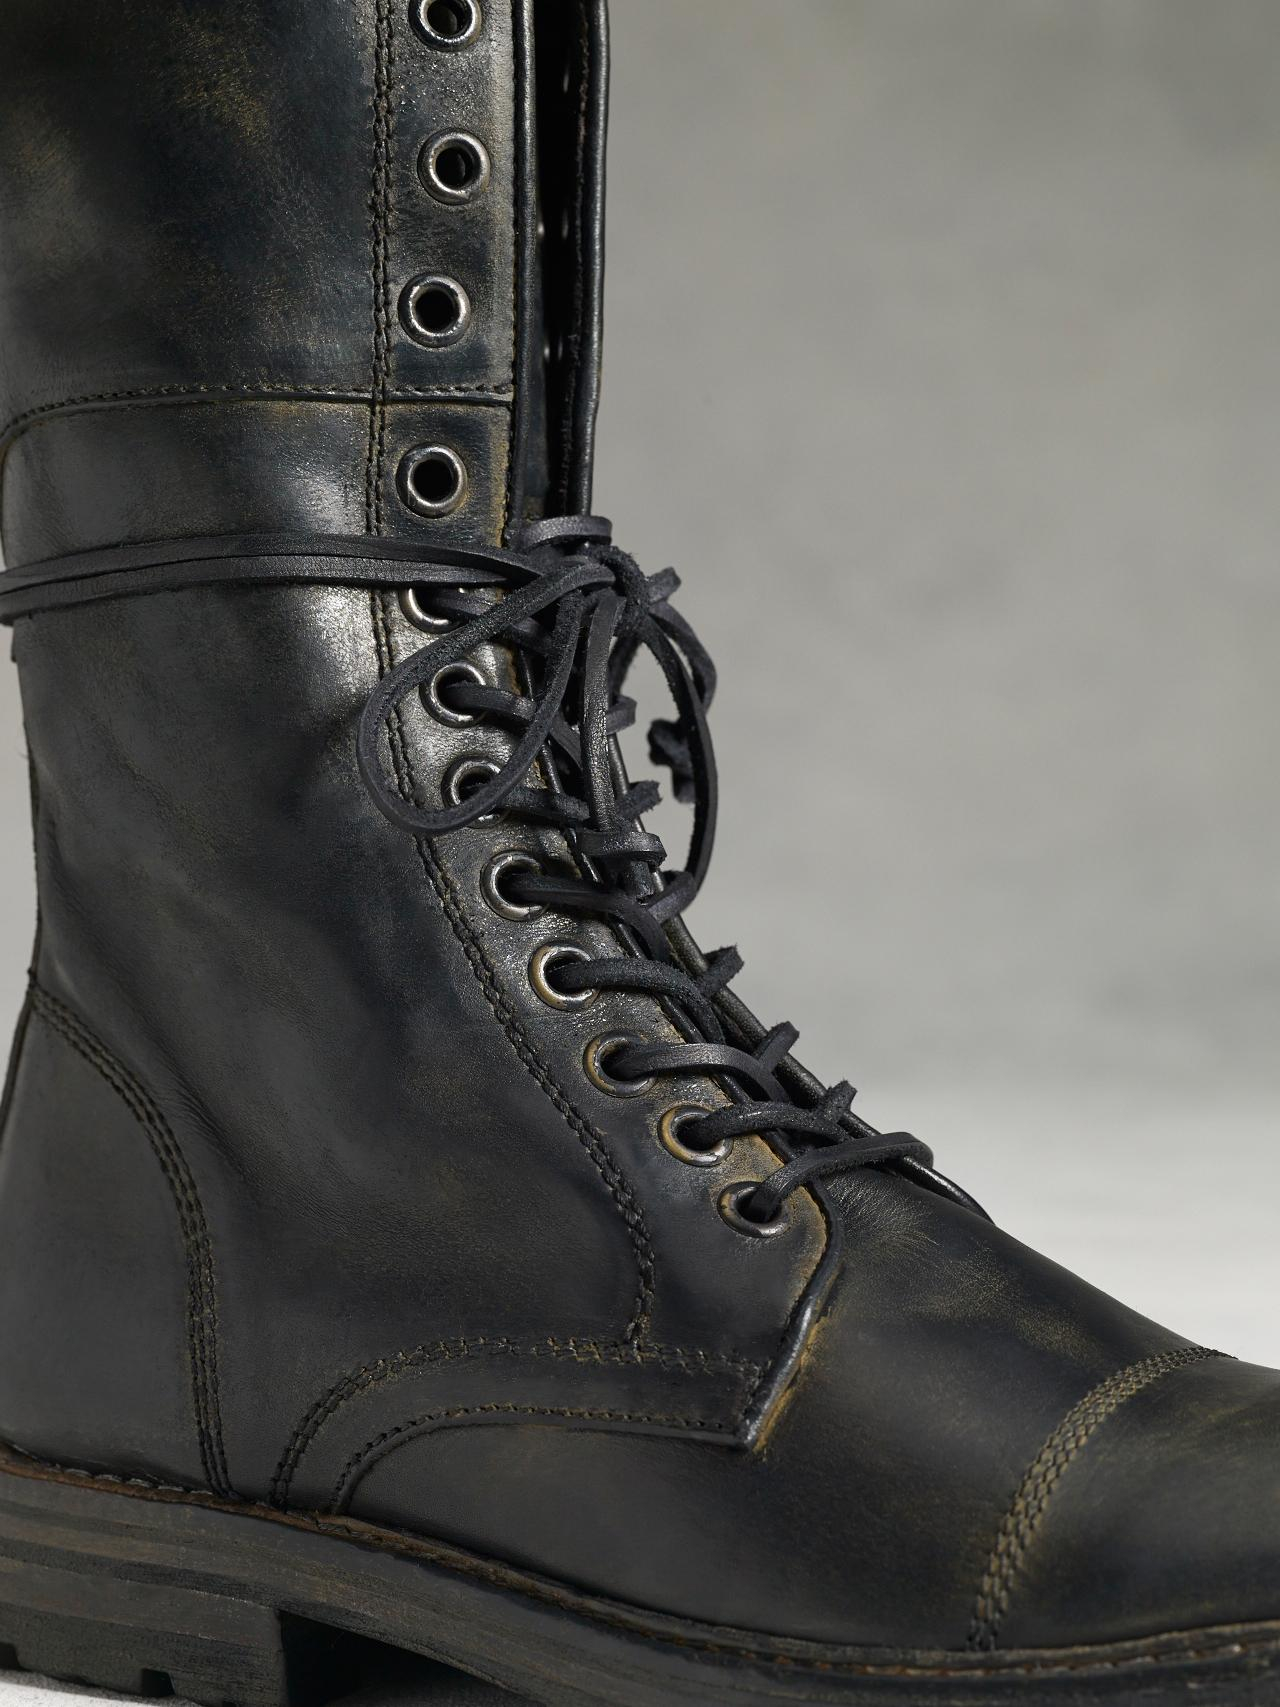 Stanley Boots for Men for Sale, Shop New & Used Men's Boots